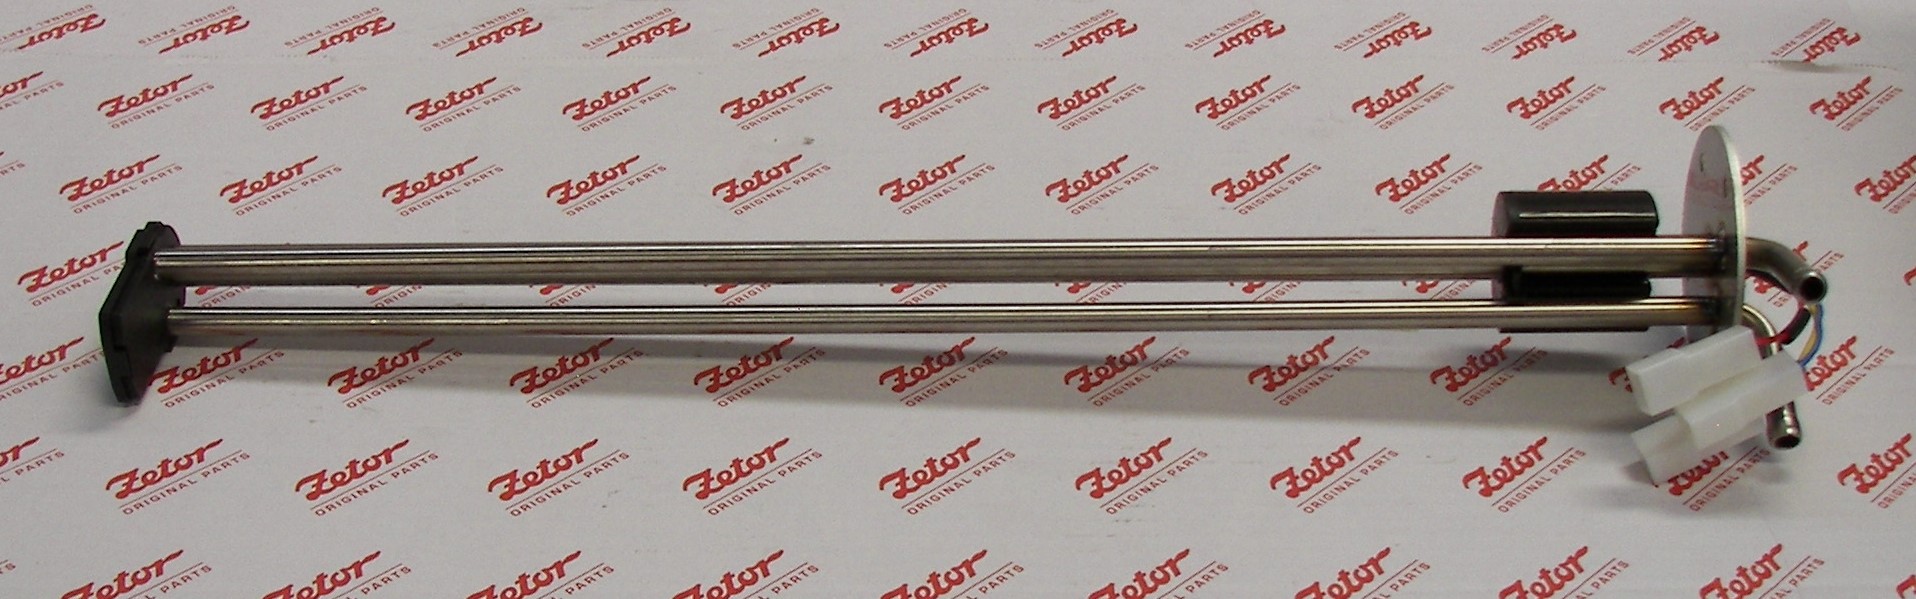 FLOAT, 18-1/5" LONG, WITH SQUARE CONNECTORS, INCLUDES GASKET